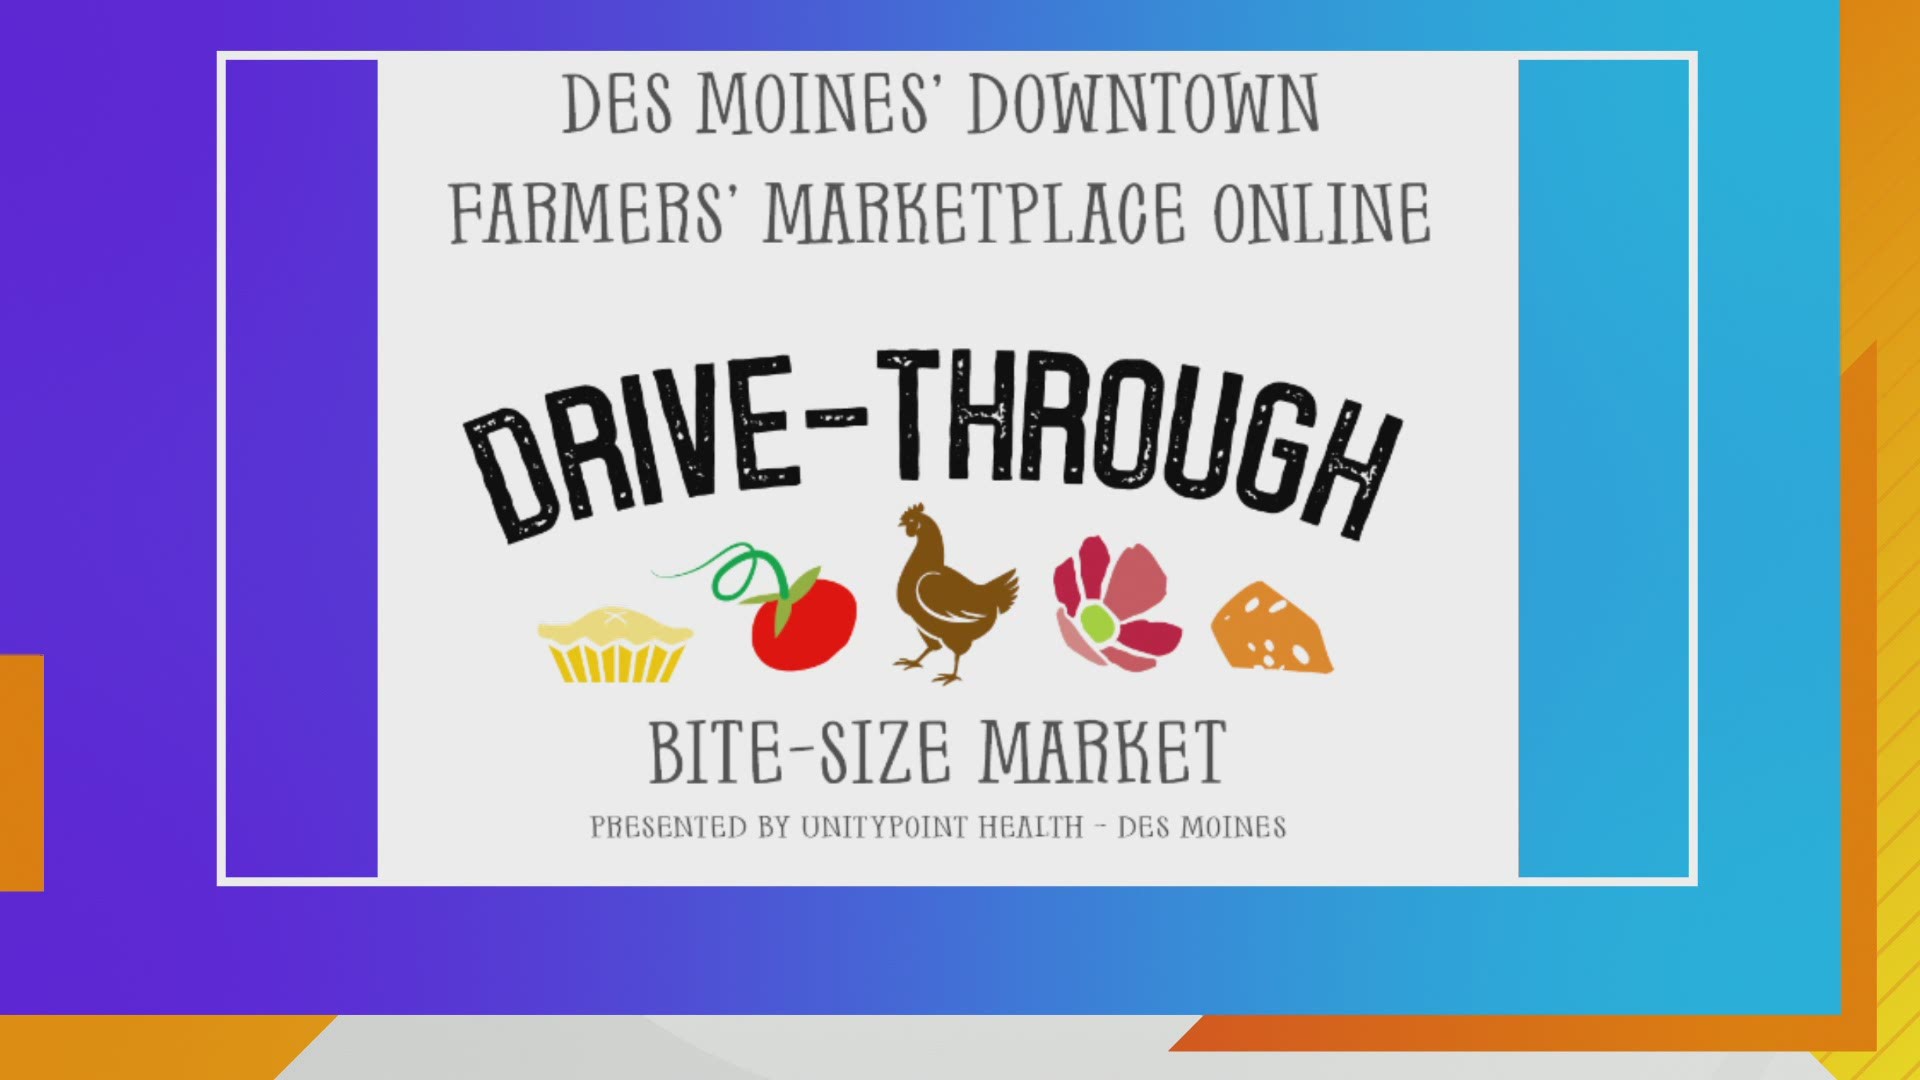 Next up will be the Drive-Through Winter Market held Saturday, Nov. 21 from 9 a.m. - 2 p.m. at the Principal Park parking lot